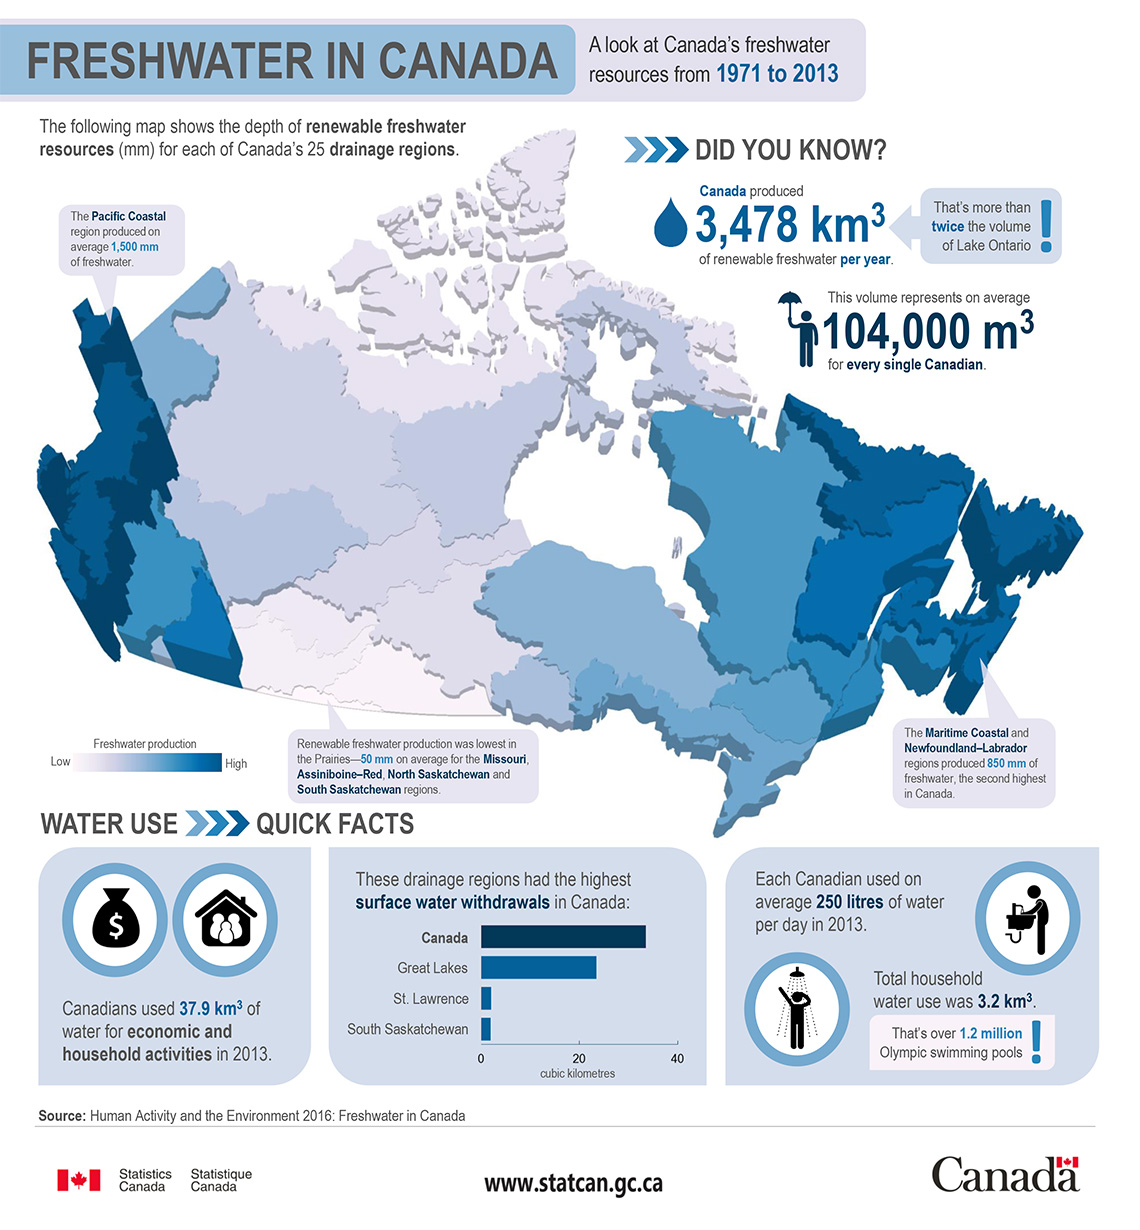 Infographic: Freshwater in Canada: A look at Canada's freshwater resources from 1971 to 2013